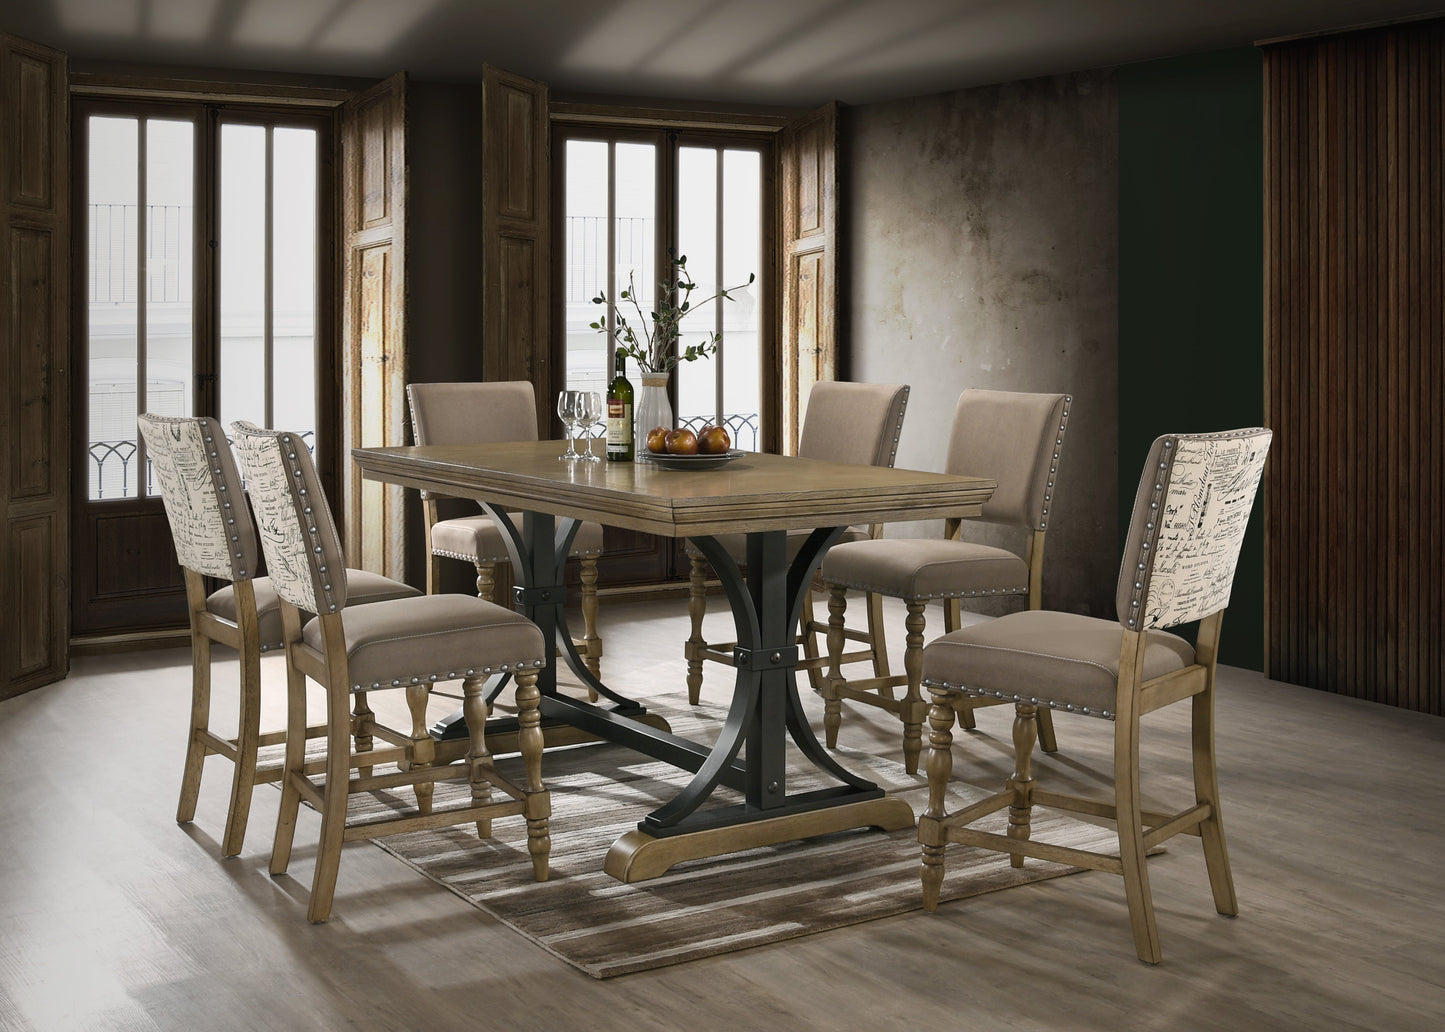 Birmingham 7-piece Counter Height Dining Set, Driftwood Finish Trestle Table with 6 Chairs